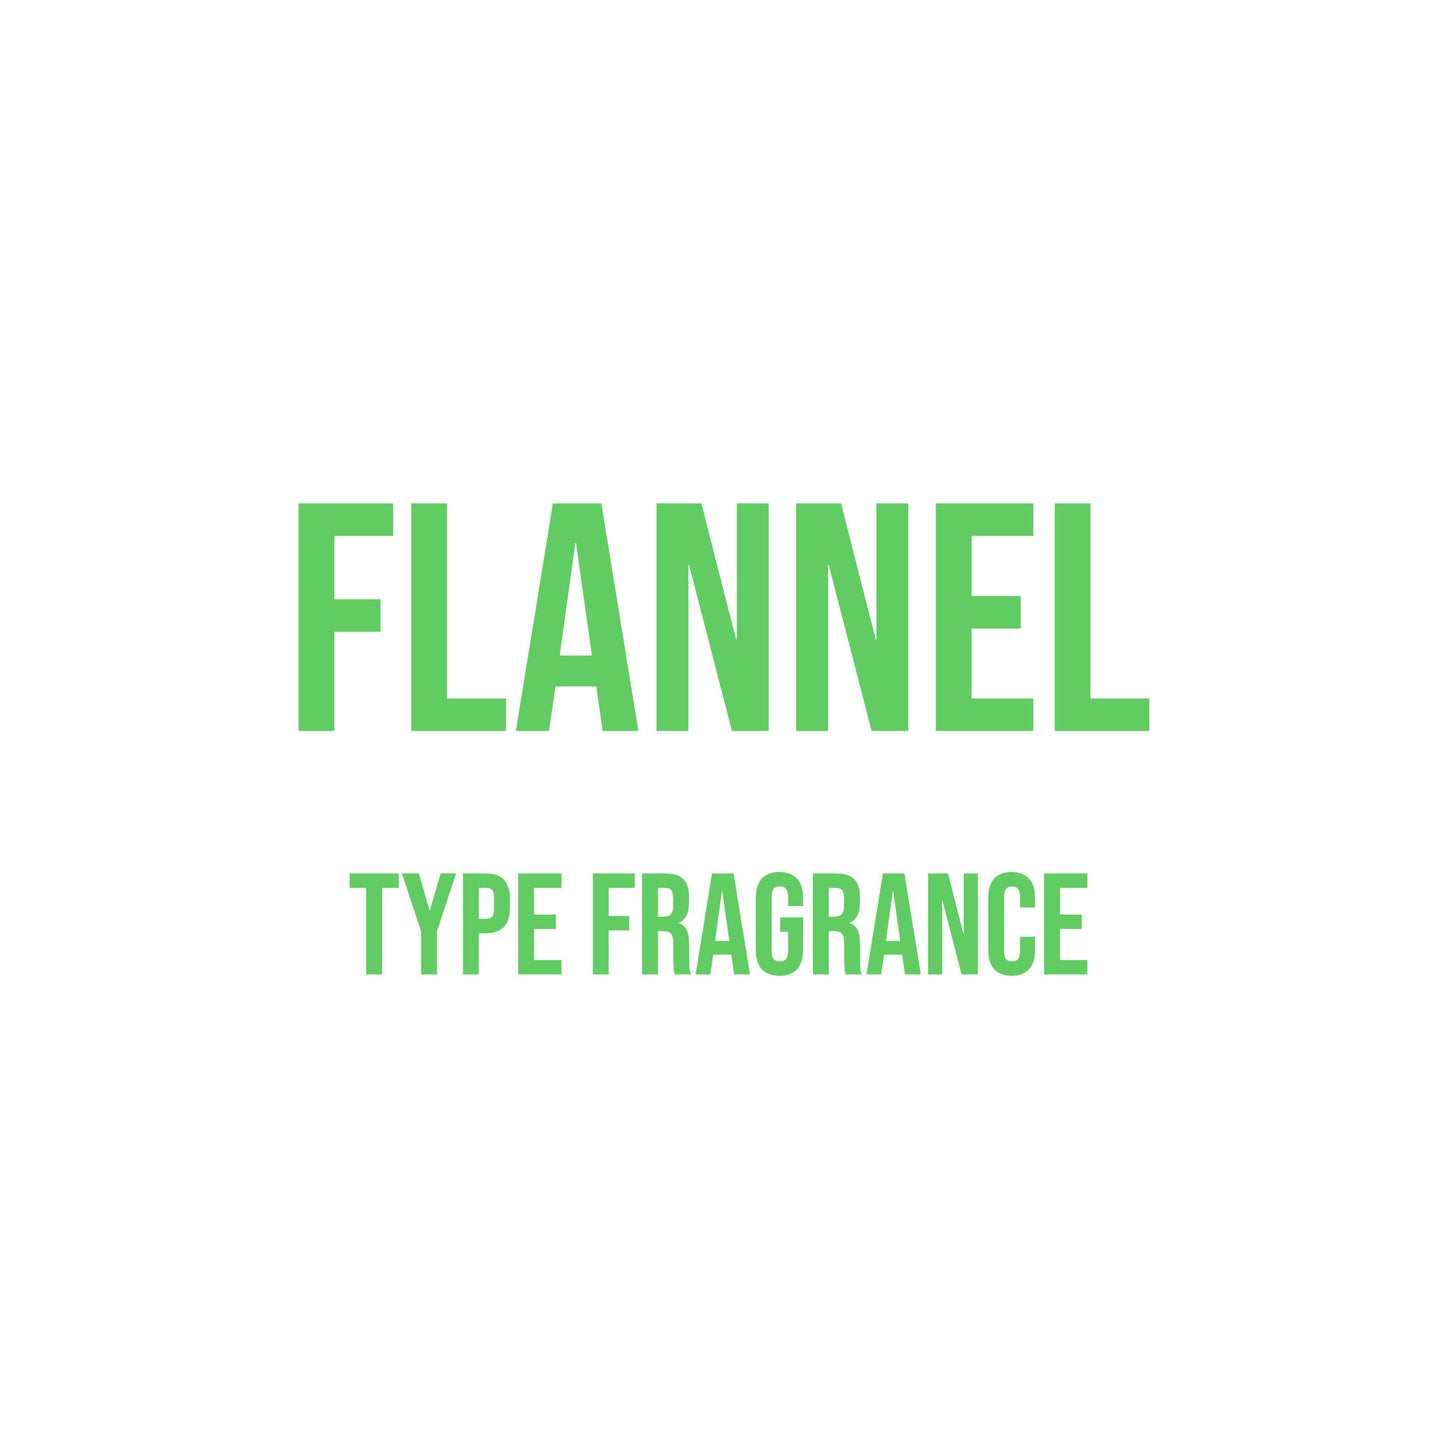 Flannel Type Fragrance